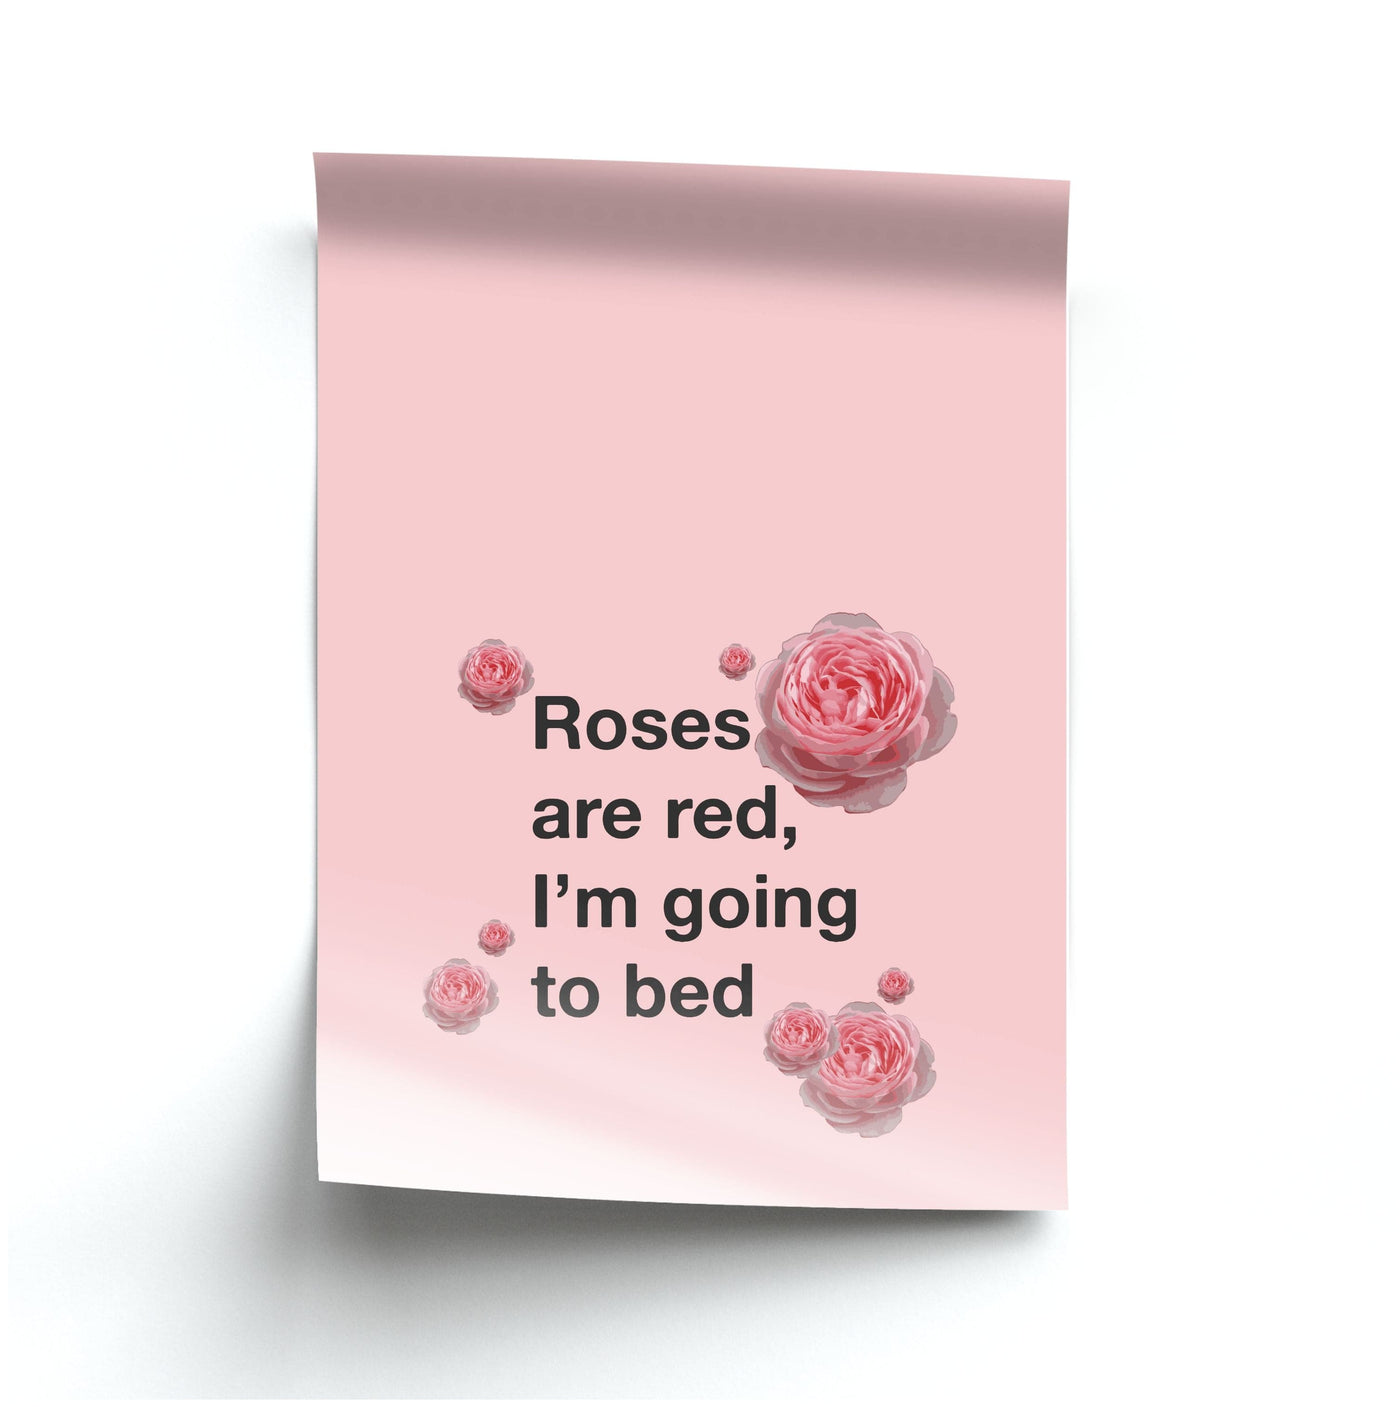 Roses Are Red I'm Going To Bed - Funny Quotes Poster